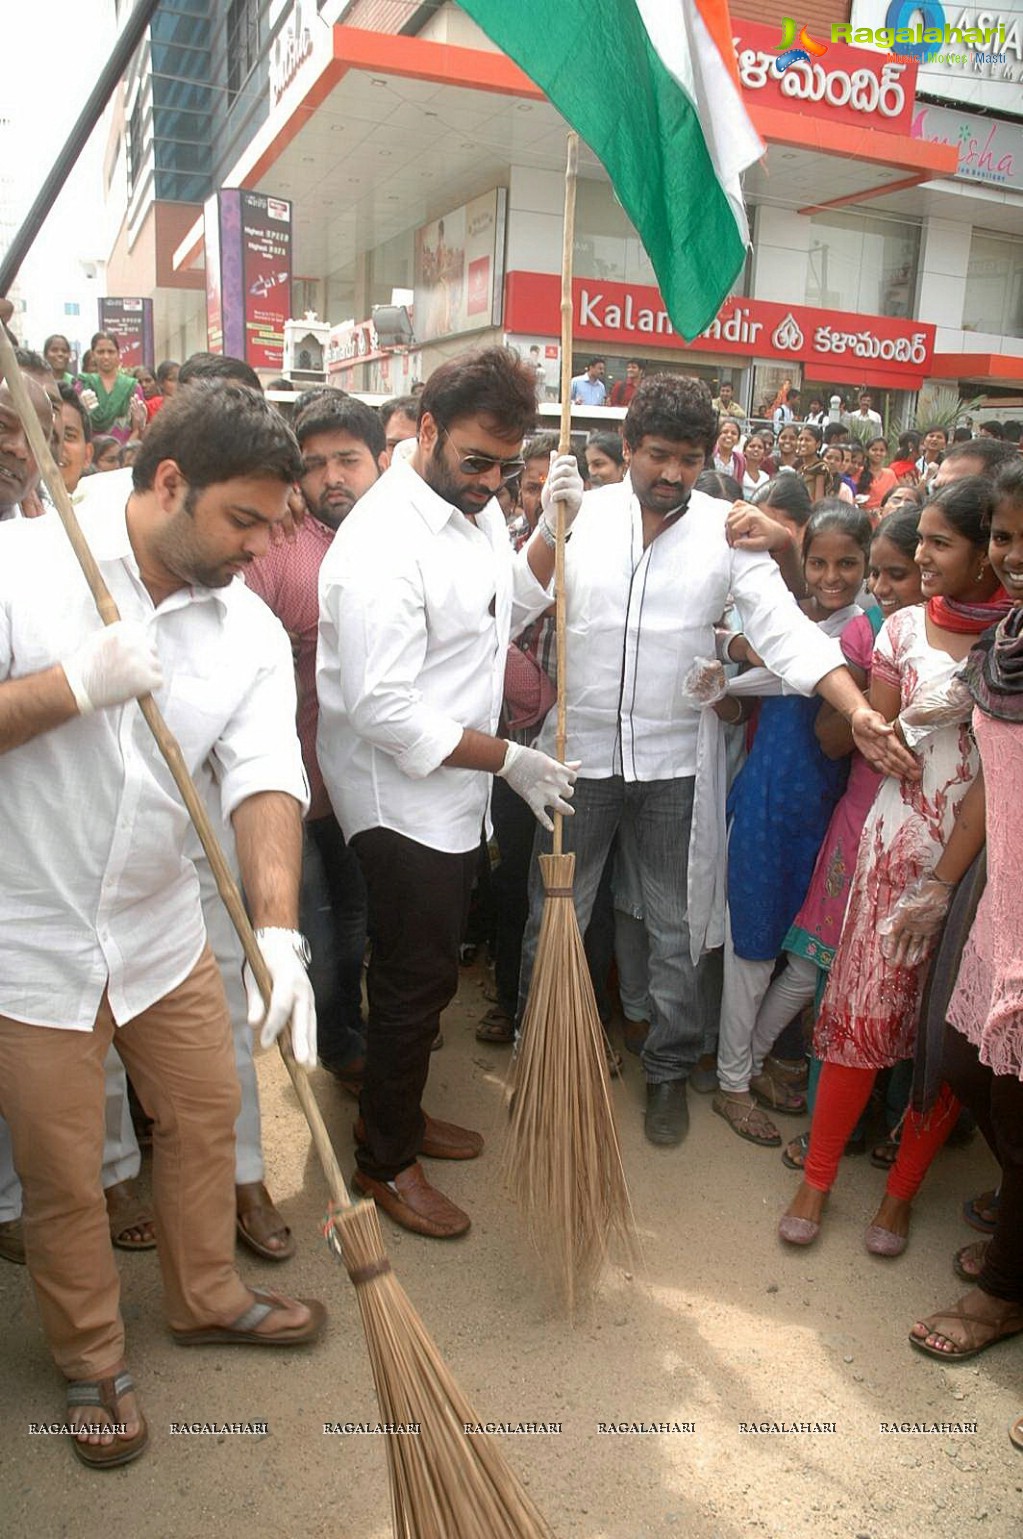 Nara Rohit participates in Swachh Bharat Campaign at ECIL, Hyderabad